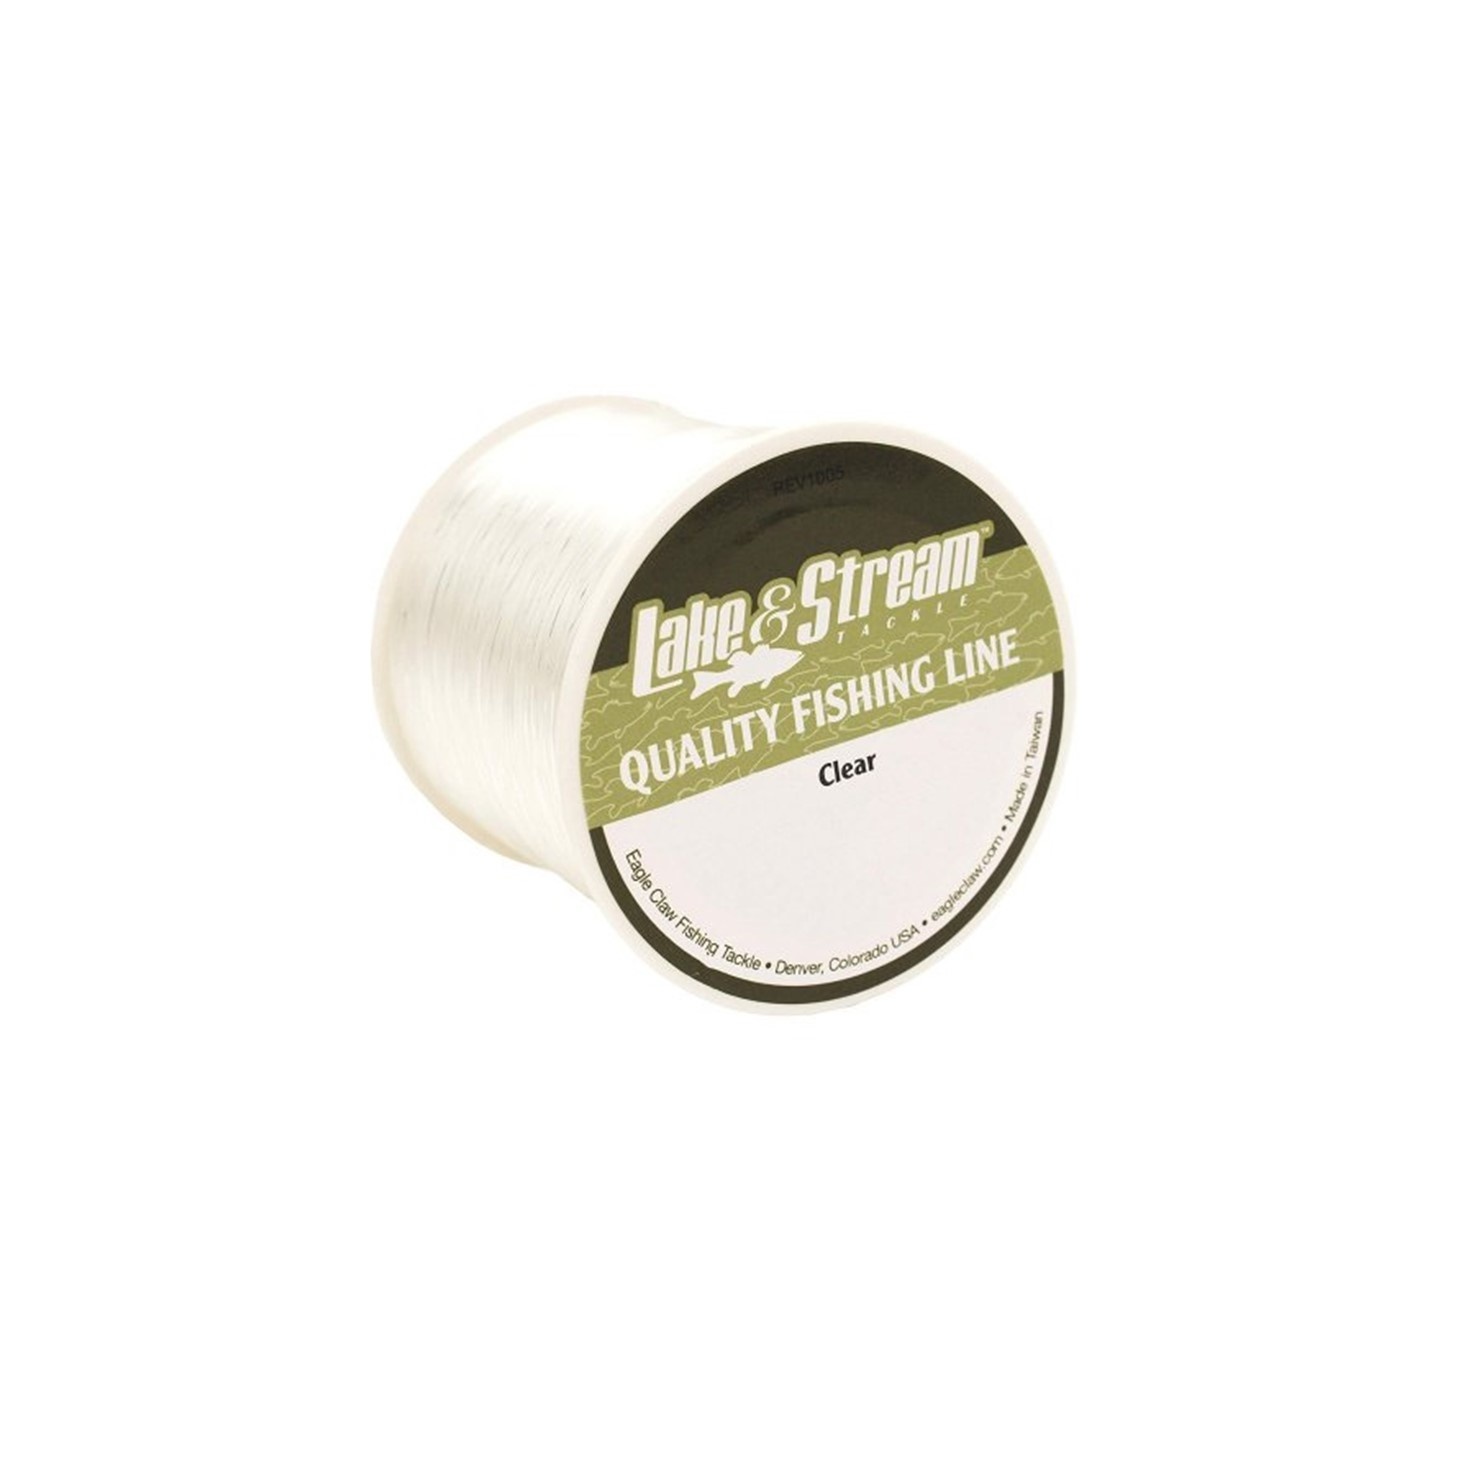 Eagle Claw Clear Fishing Line 670 Yd - 8Ib - Cache Tactical Supply